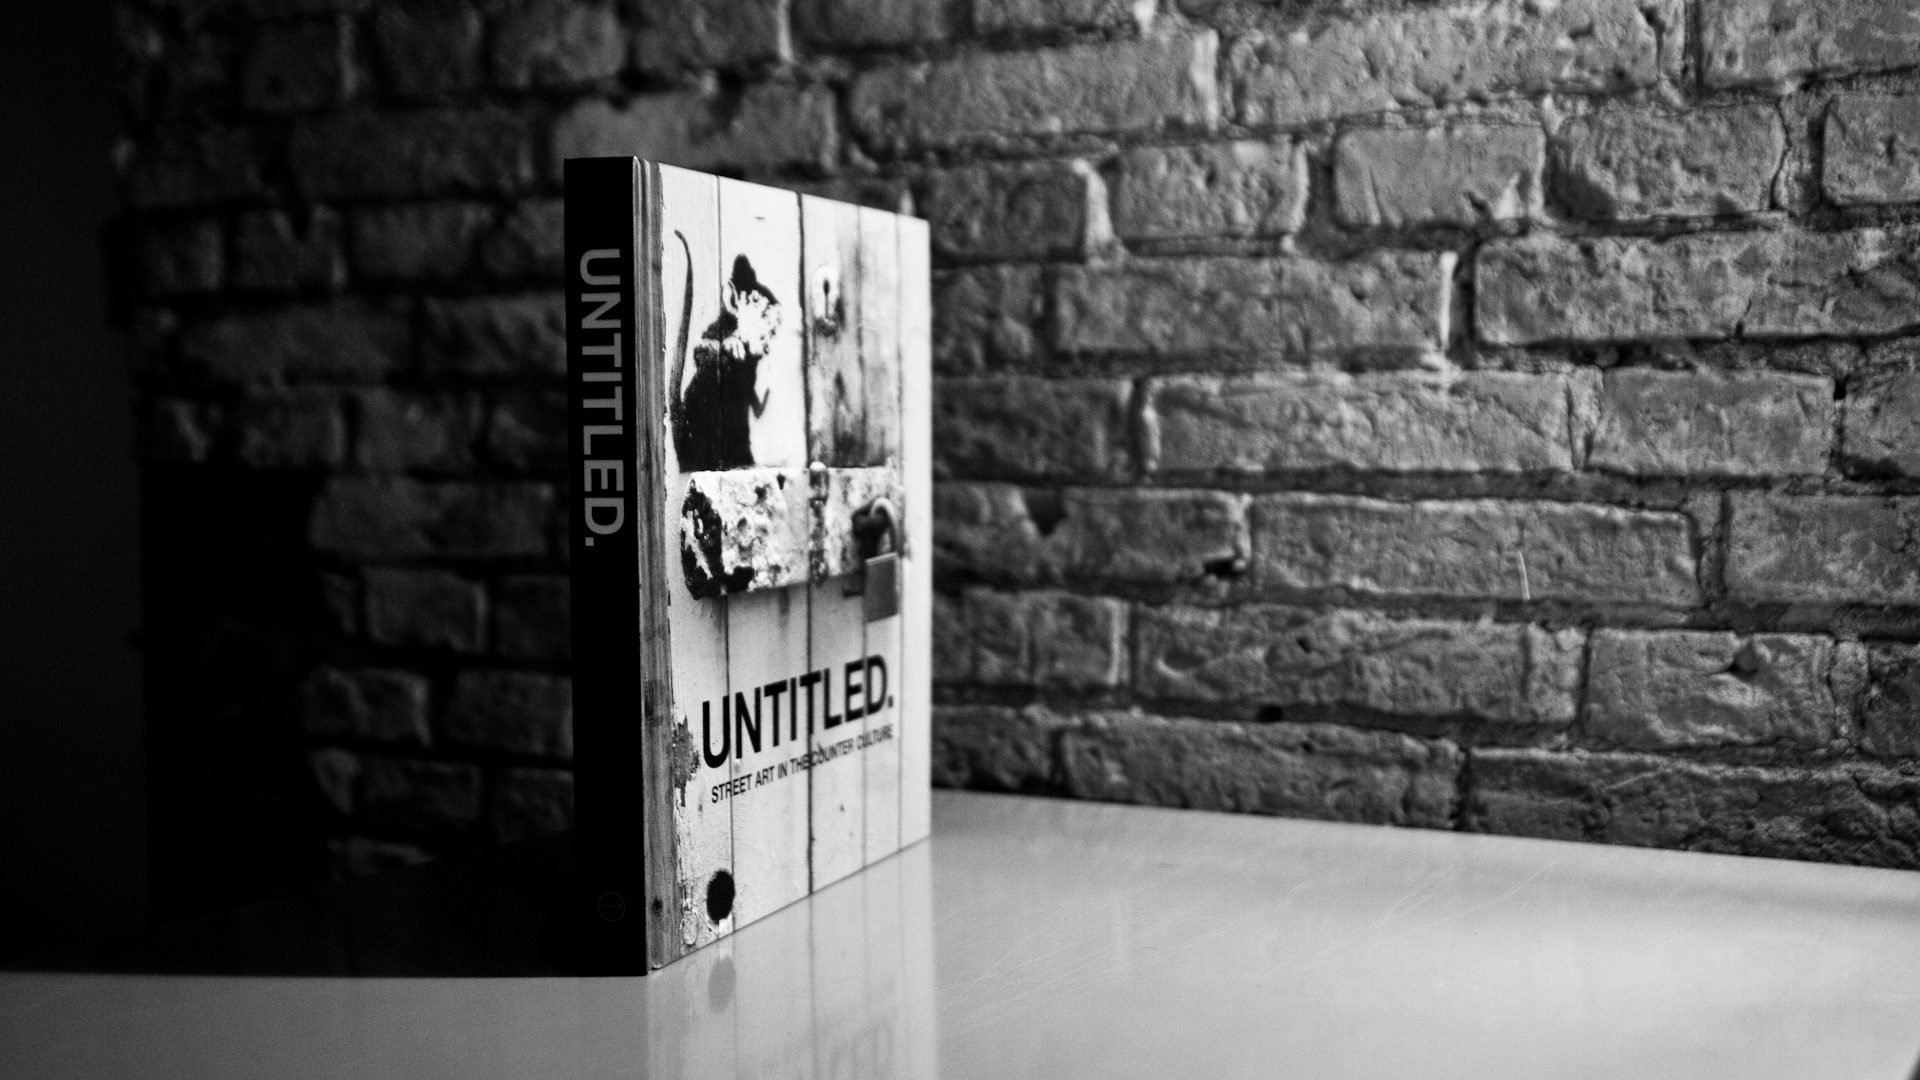 Untitled – Street Art in the Counter Culture